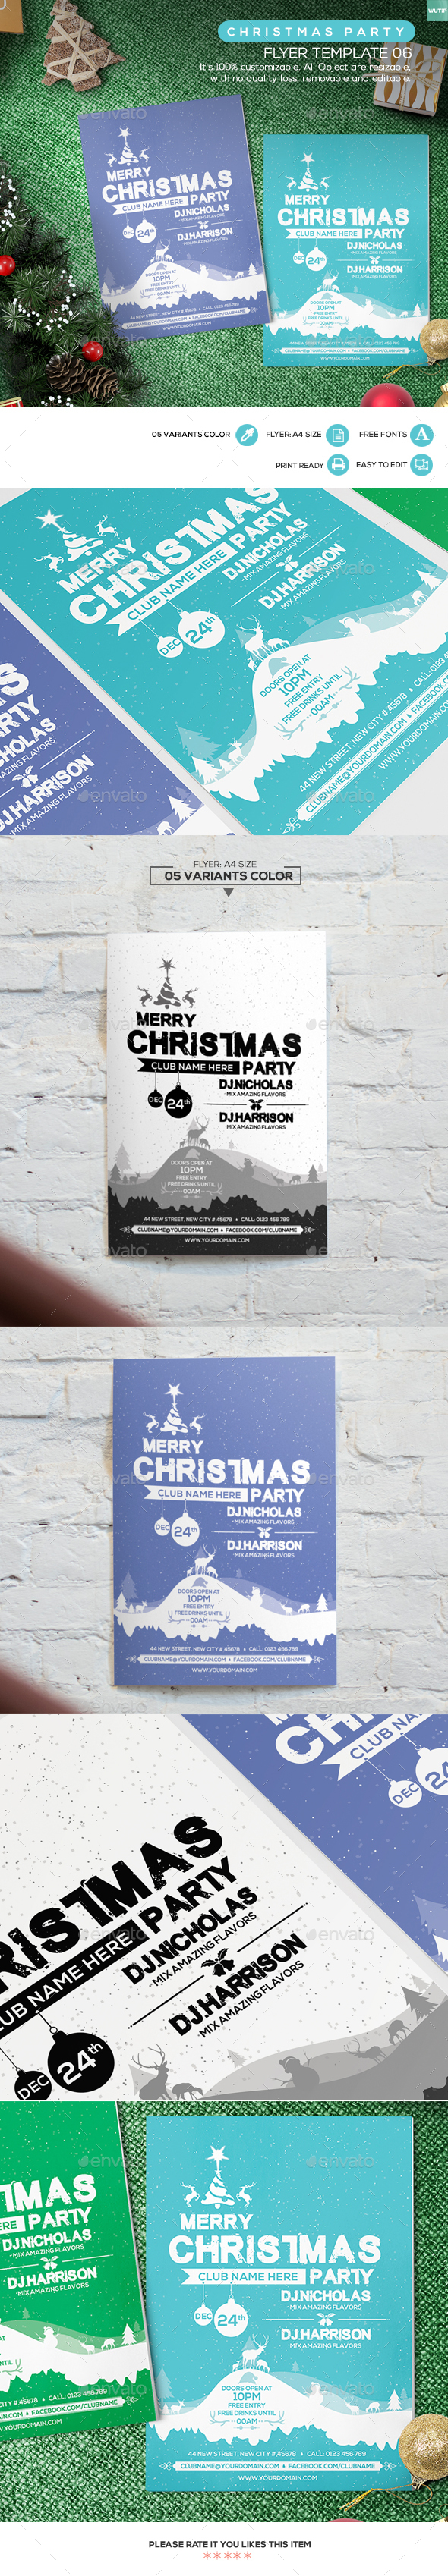 Christmas Party - Flyer Template 06